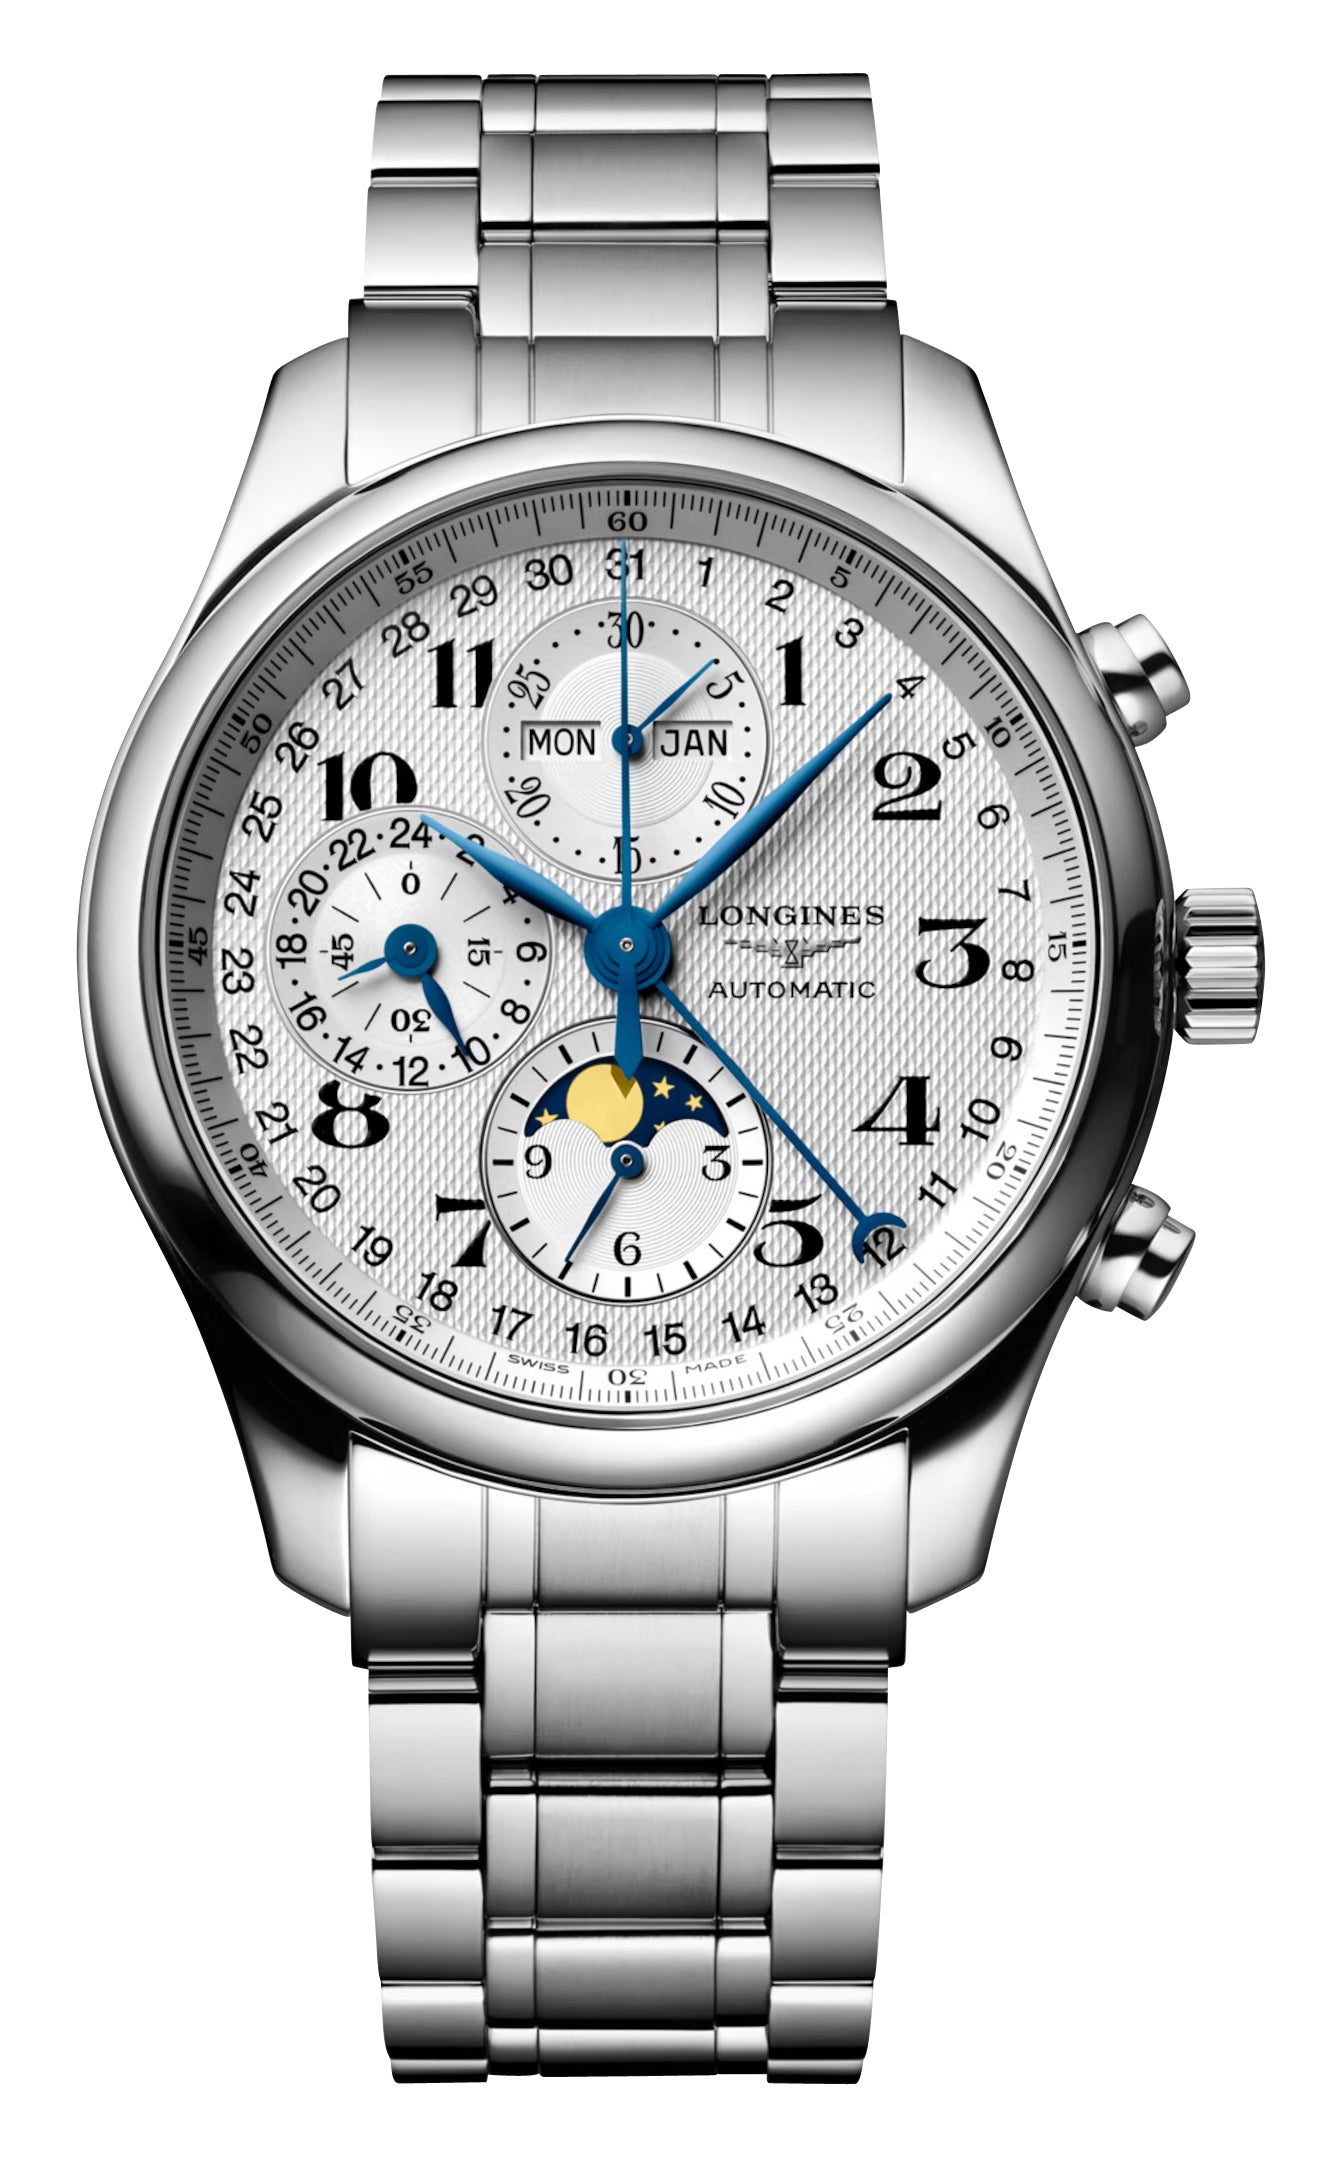 update alt-text with template Watches - Mens-Longines-L27734786-12-hour display, 24-hour display, 40 - 45 mm, chronograph, date, day, day/night indicator, Longines, Master Collection, mens, menswatches, month, moonphase, new arrivals, round, rpSKU_L26285197, rpSKU_L26734516, rpSKU_L27555797, rpSKU_L27935197, rpSKU_L28935117, seconds sub-dial, silver-tone, stainless steel band, stainless steel case, swiss automatic, watches-Watches & Beyond